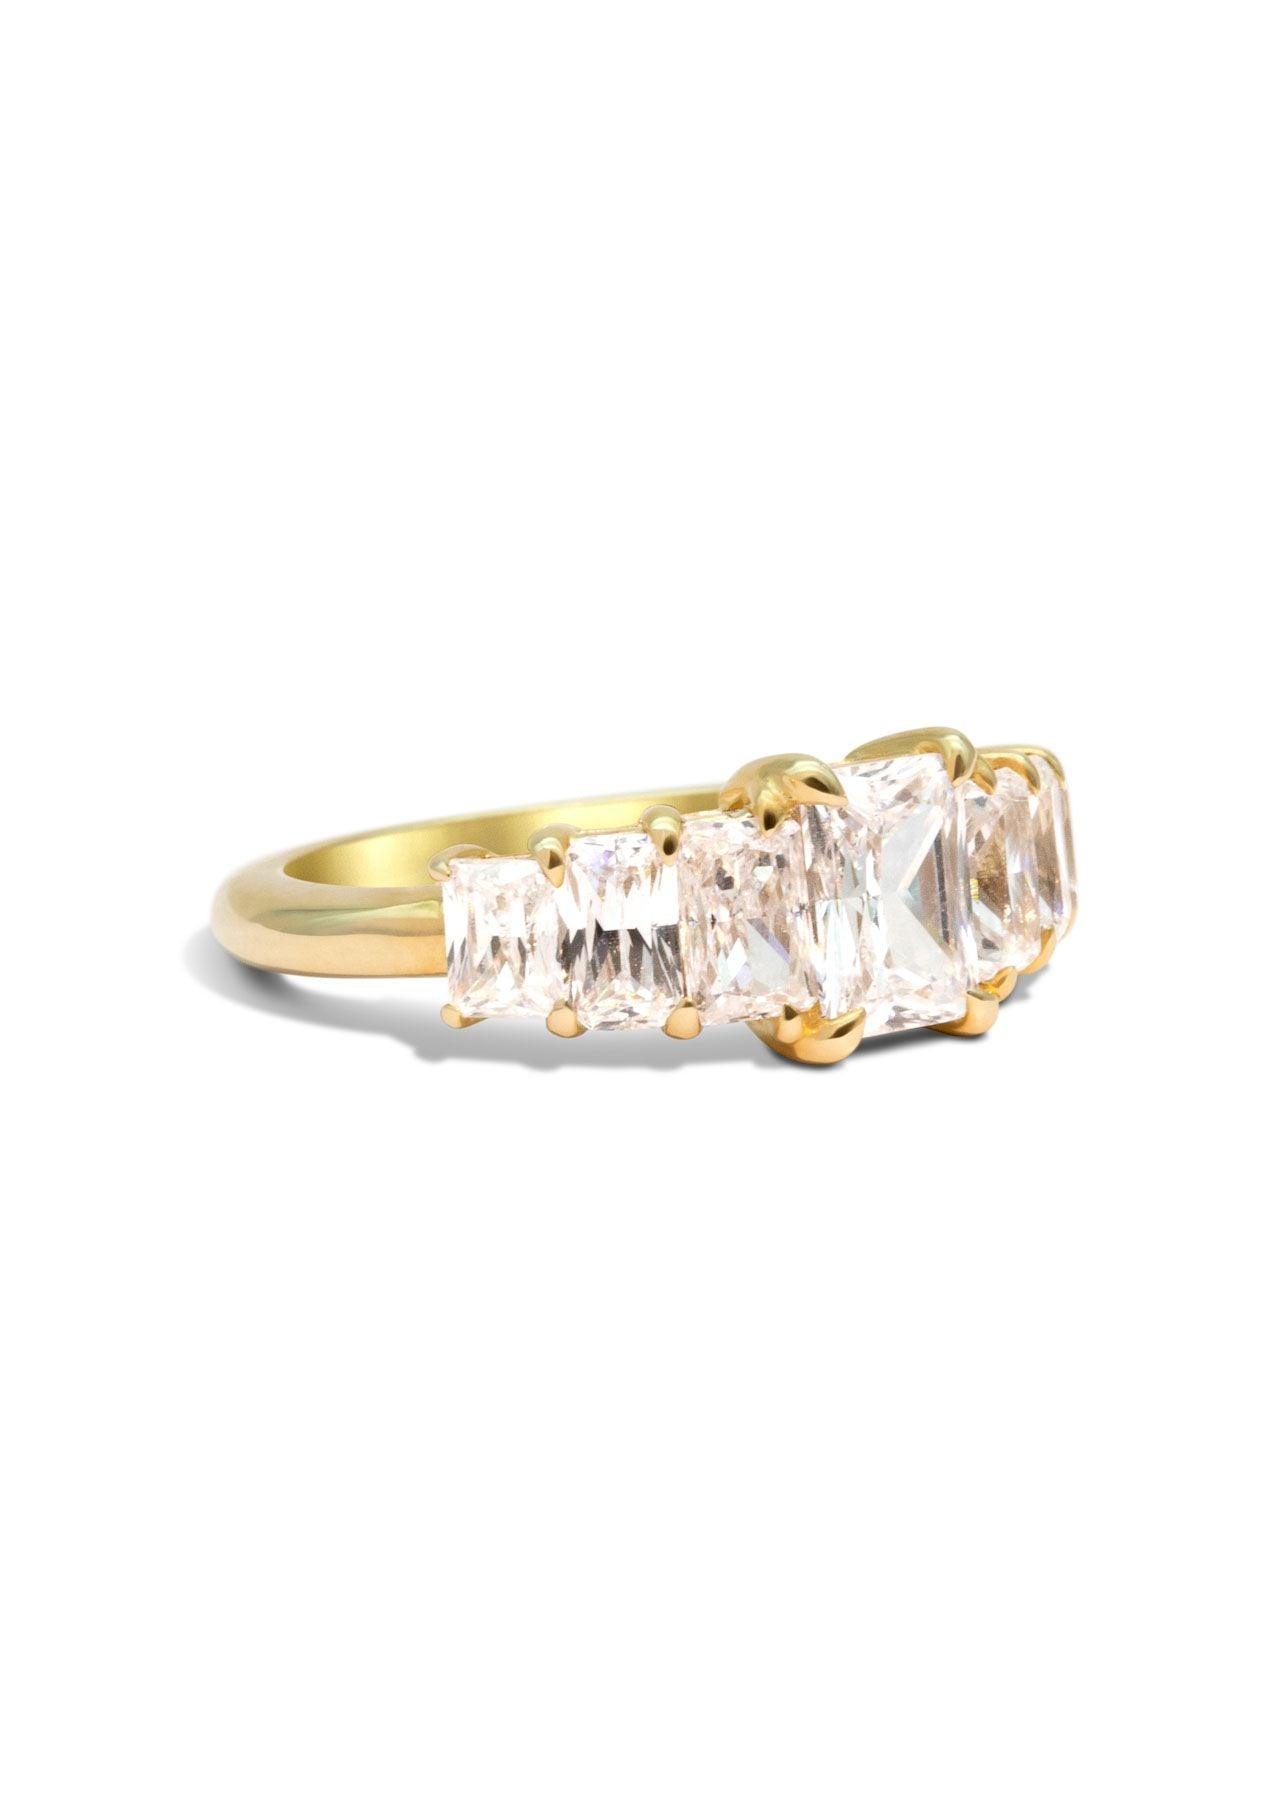 The Radiant Banks Yellow Gold Cultured Diamond Ring - Molten Store